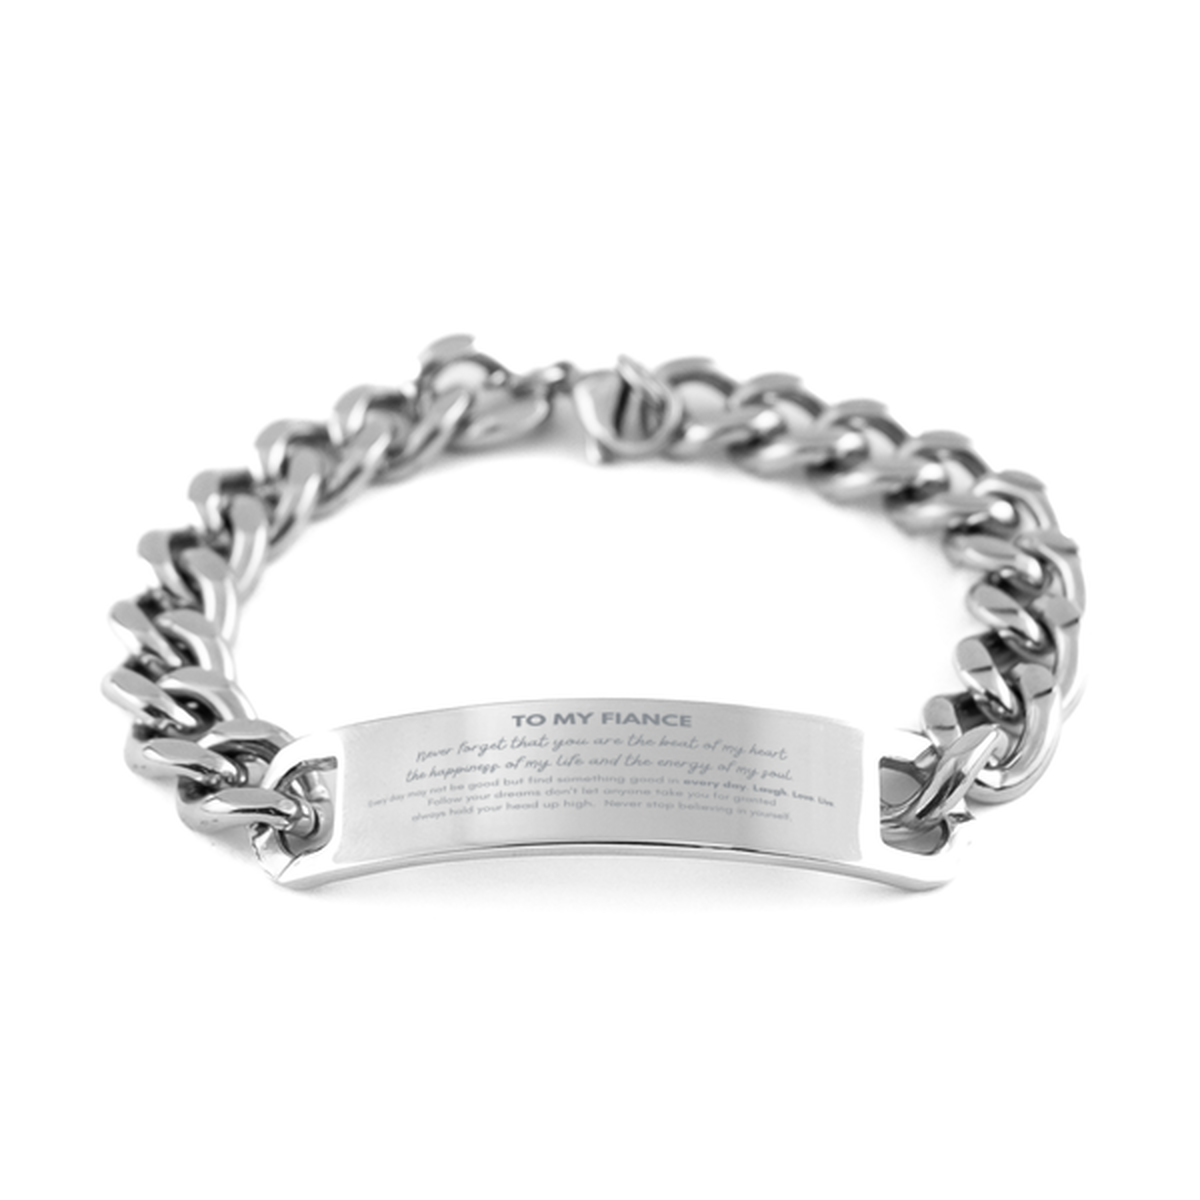 To My Fiance Bracelet Gifts, Christmas Fiance Cuban Chain Stainless Steel Bracelet Present, Birthday Unique Motivational For Fiance, To My Fiance Never forget that you are the beat of my heart the happiness of my life and the energy of my soul